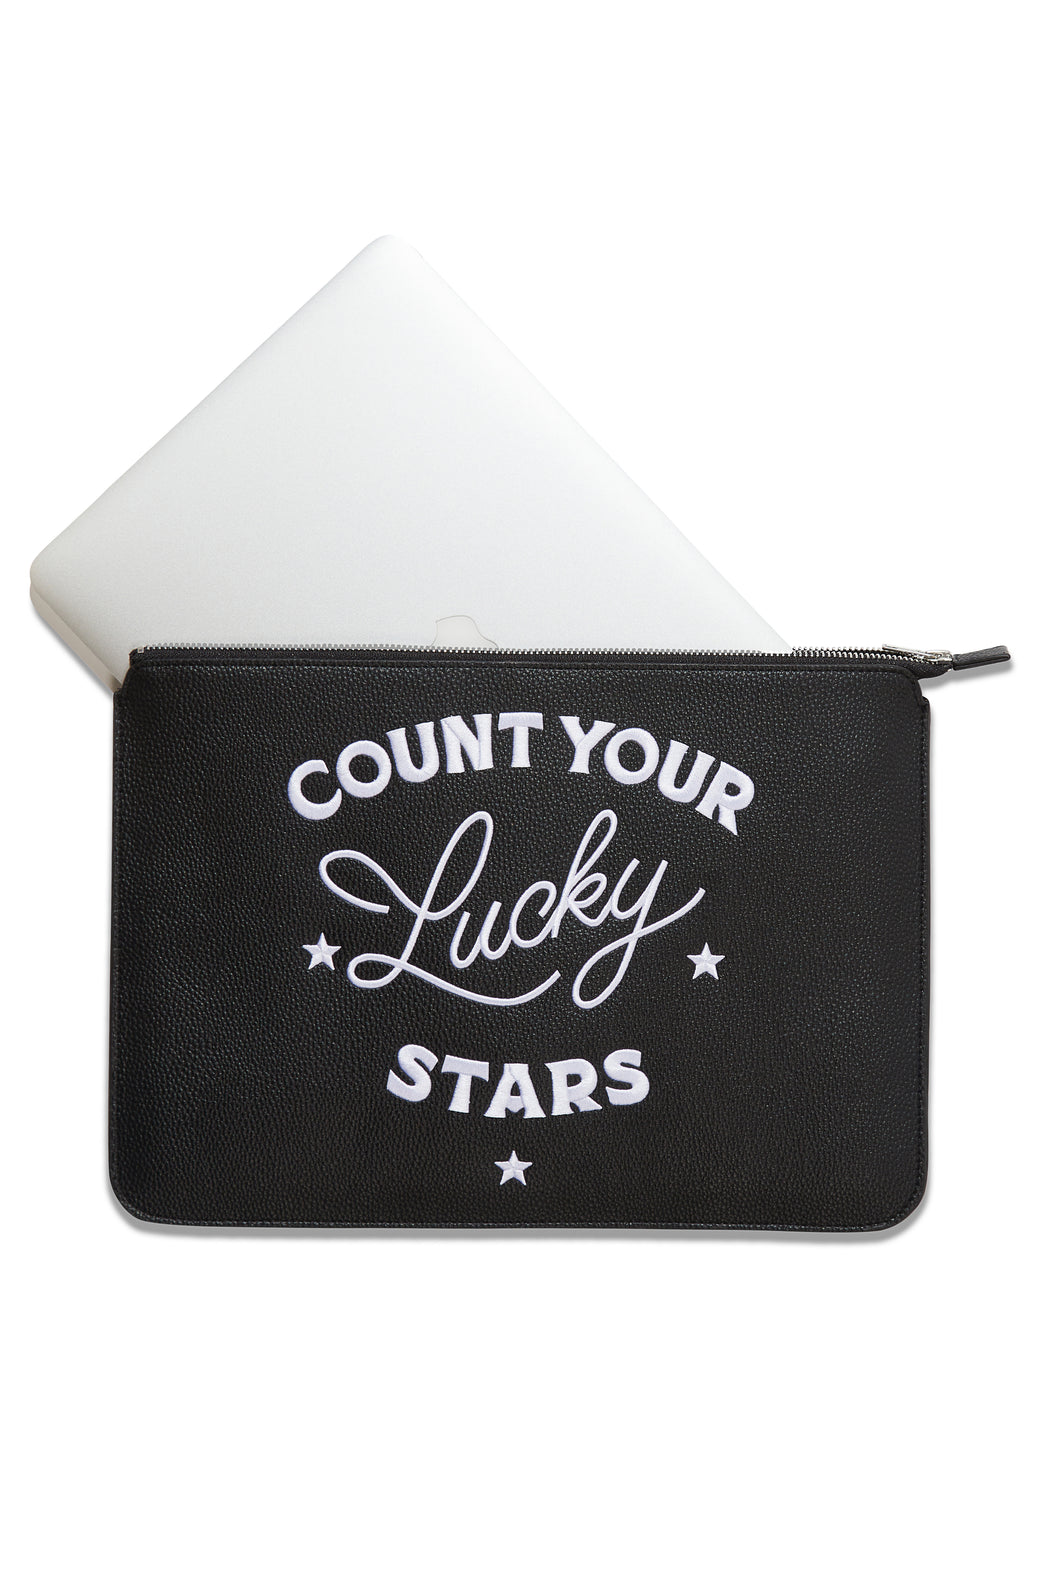 COUNT YOUR LUCKY STARS LAPTOP SLEEVE